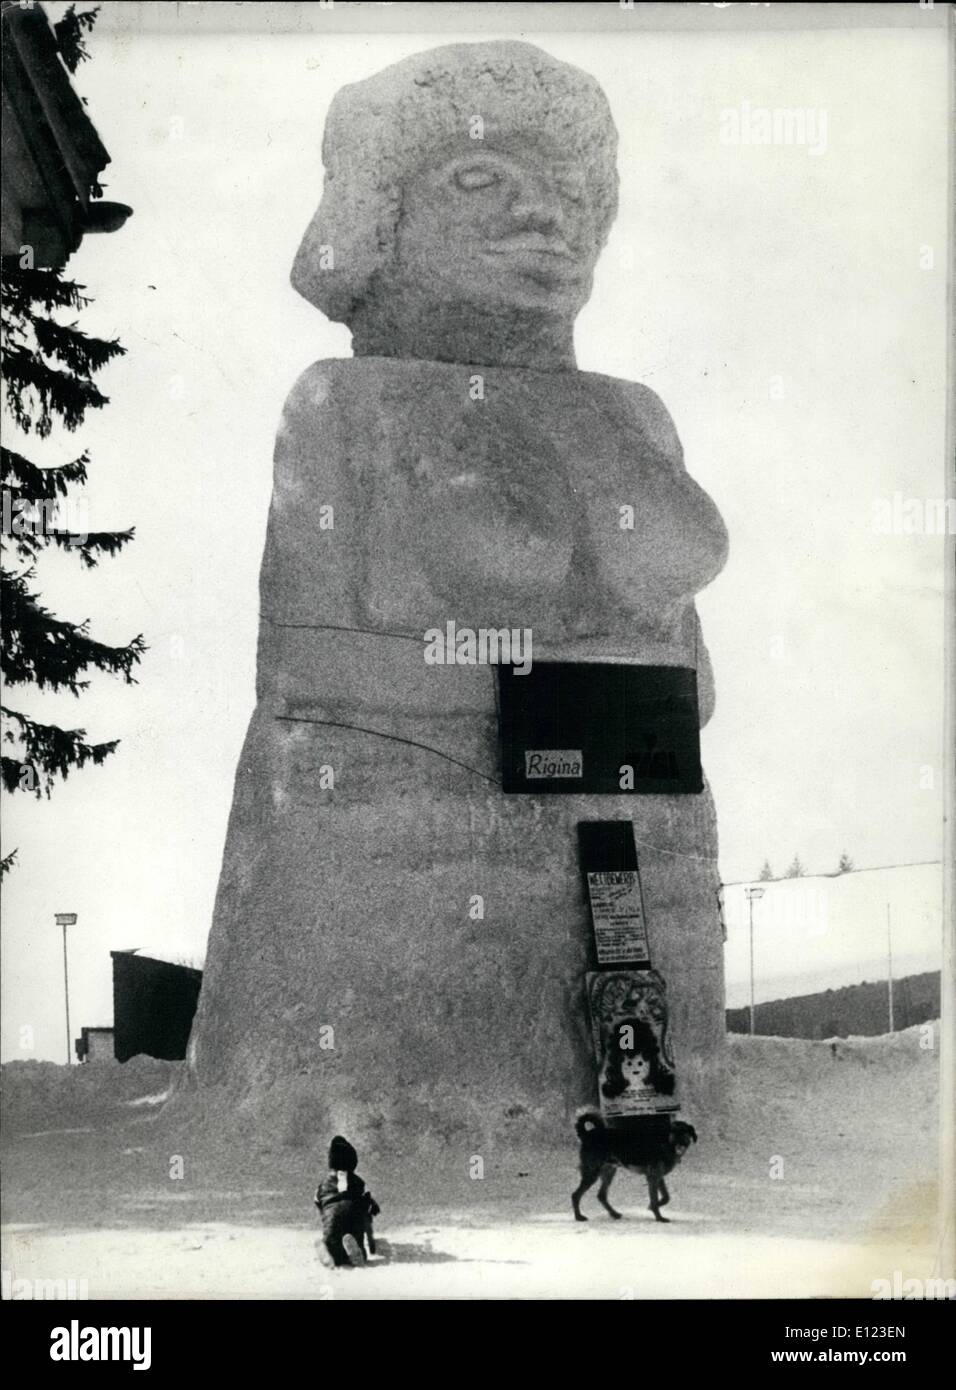 Mar. 03, 1984 - Here is the work of an amateur sculptor called ''Bonne Femme'' that sits at the entrance of Lucerne, in the mountains that overhang the small Swiss town. Monaco's Princess Caroline and Prince Albert with their Nurse Stock Photo